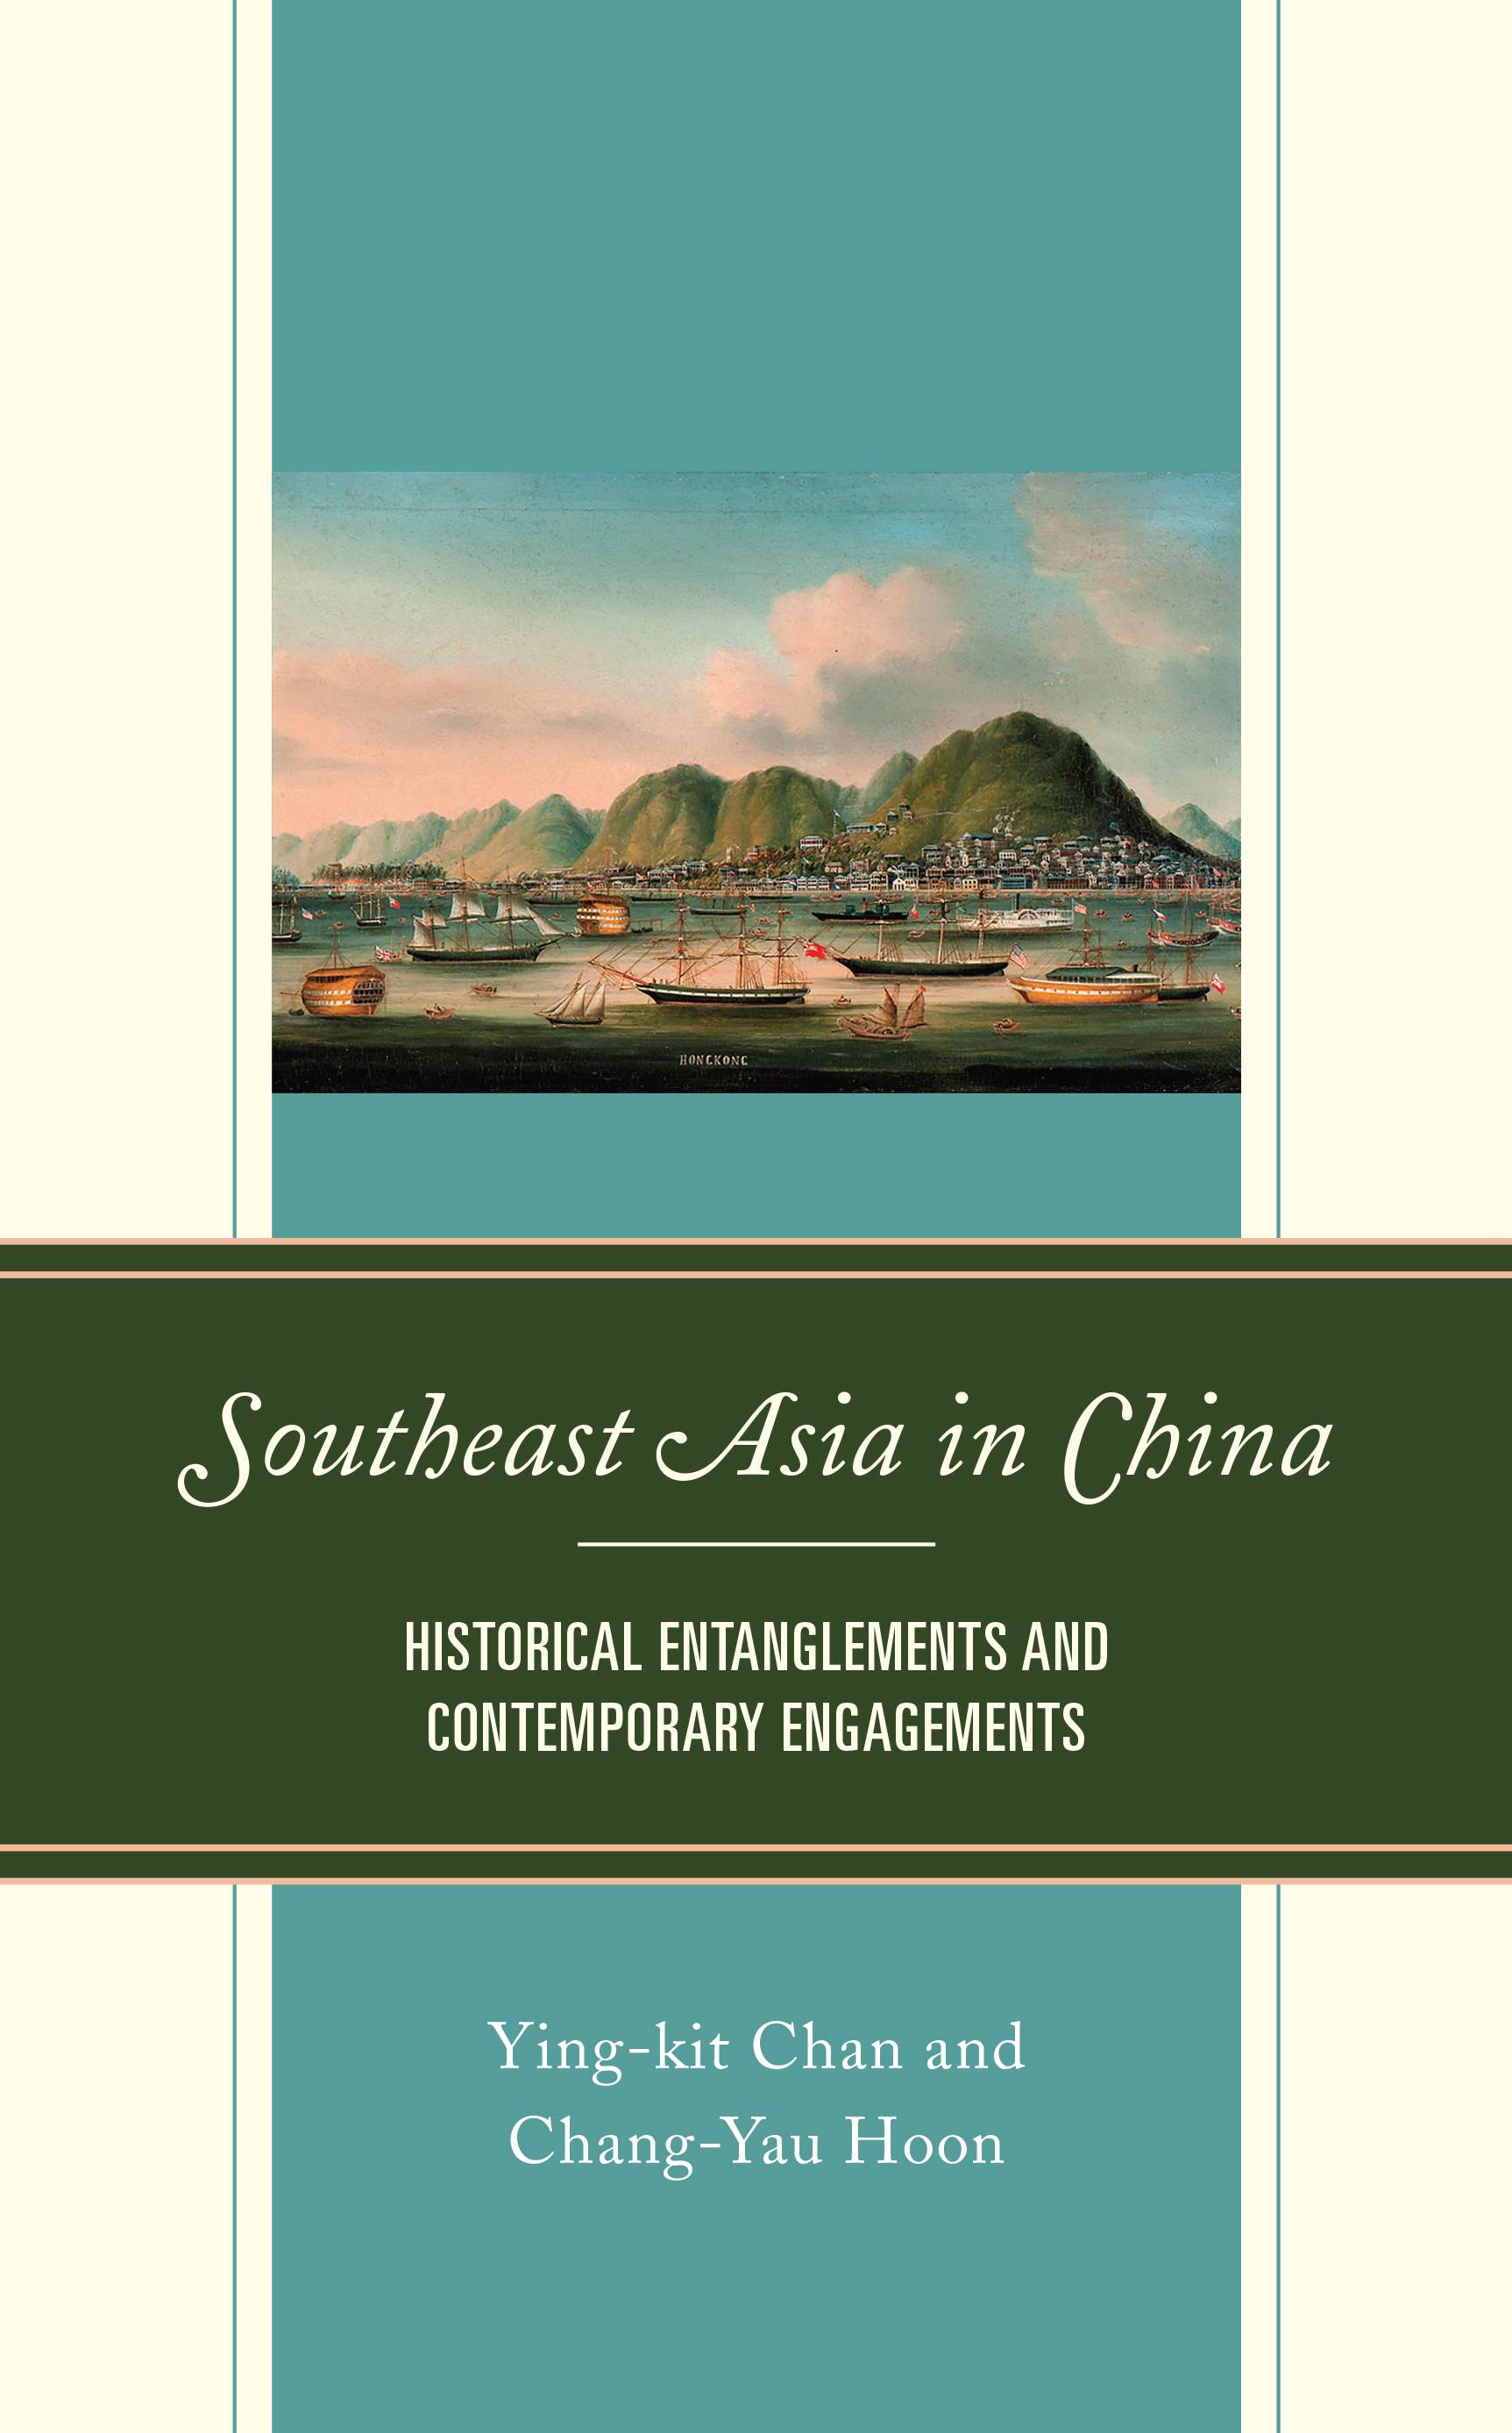 Southeast Asia in China: Historical Entanglements and Contemporary Engagements